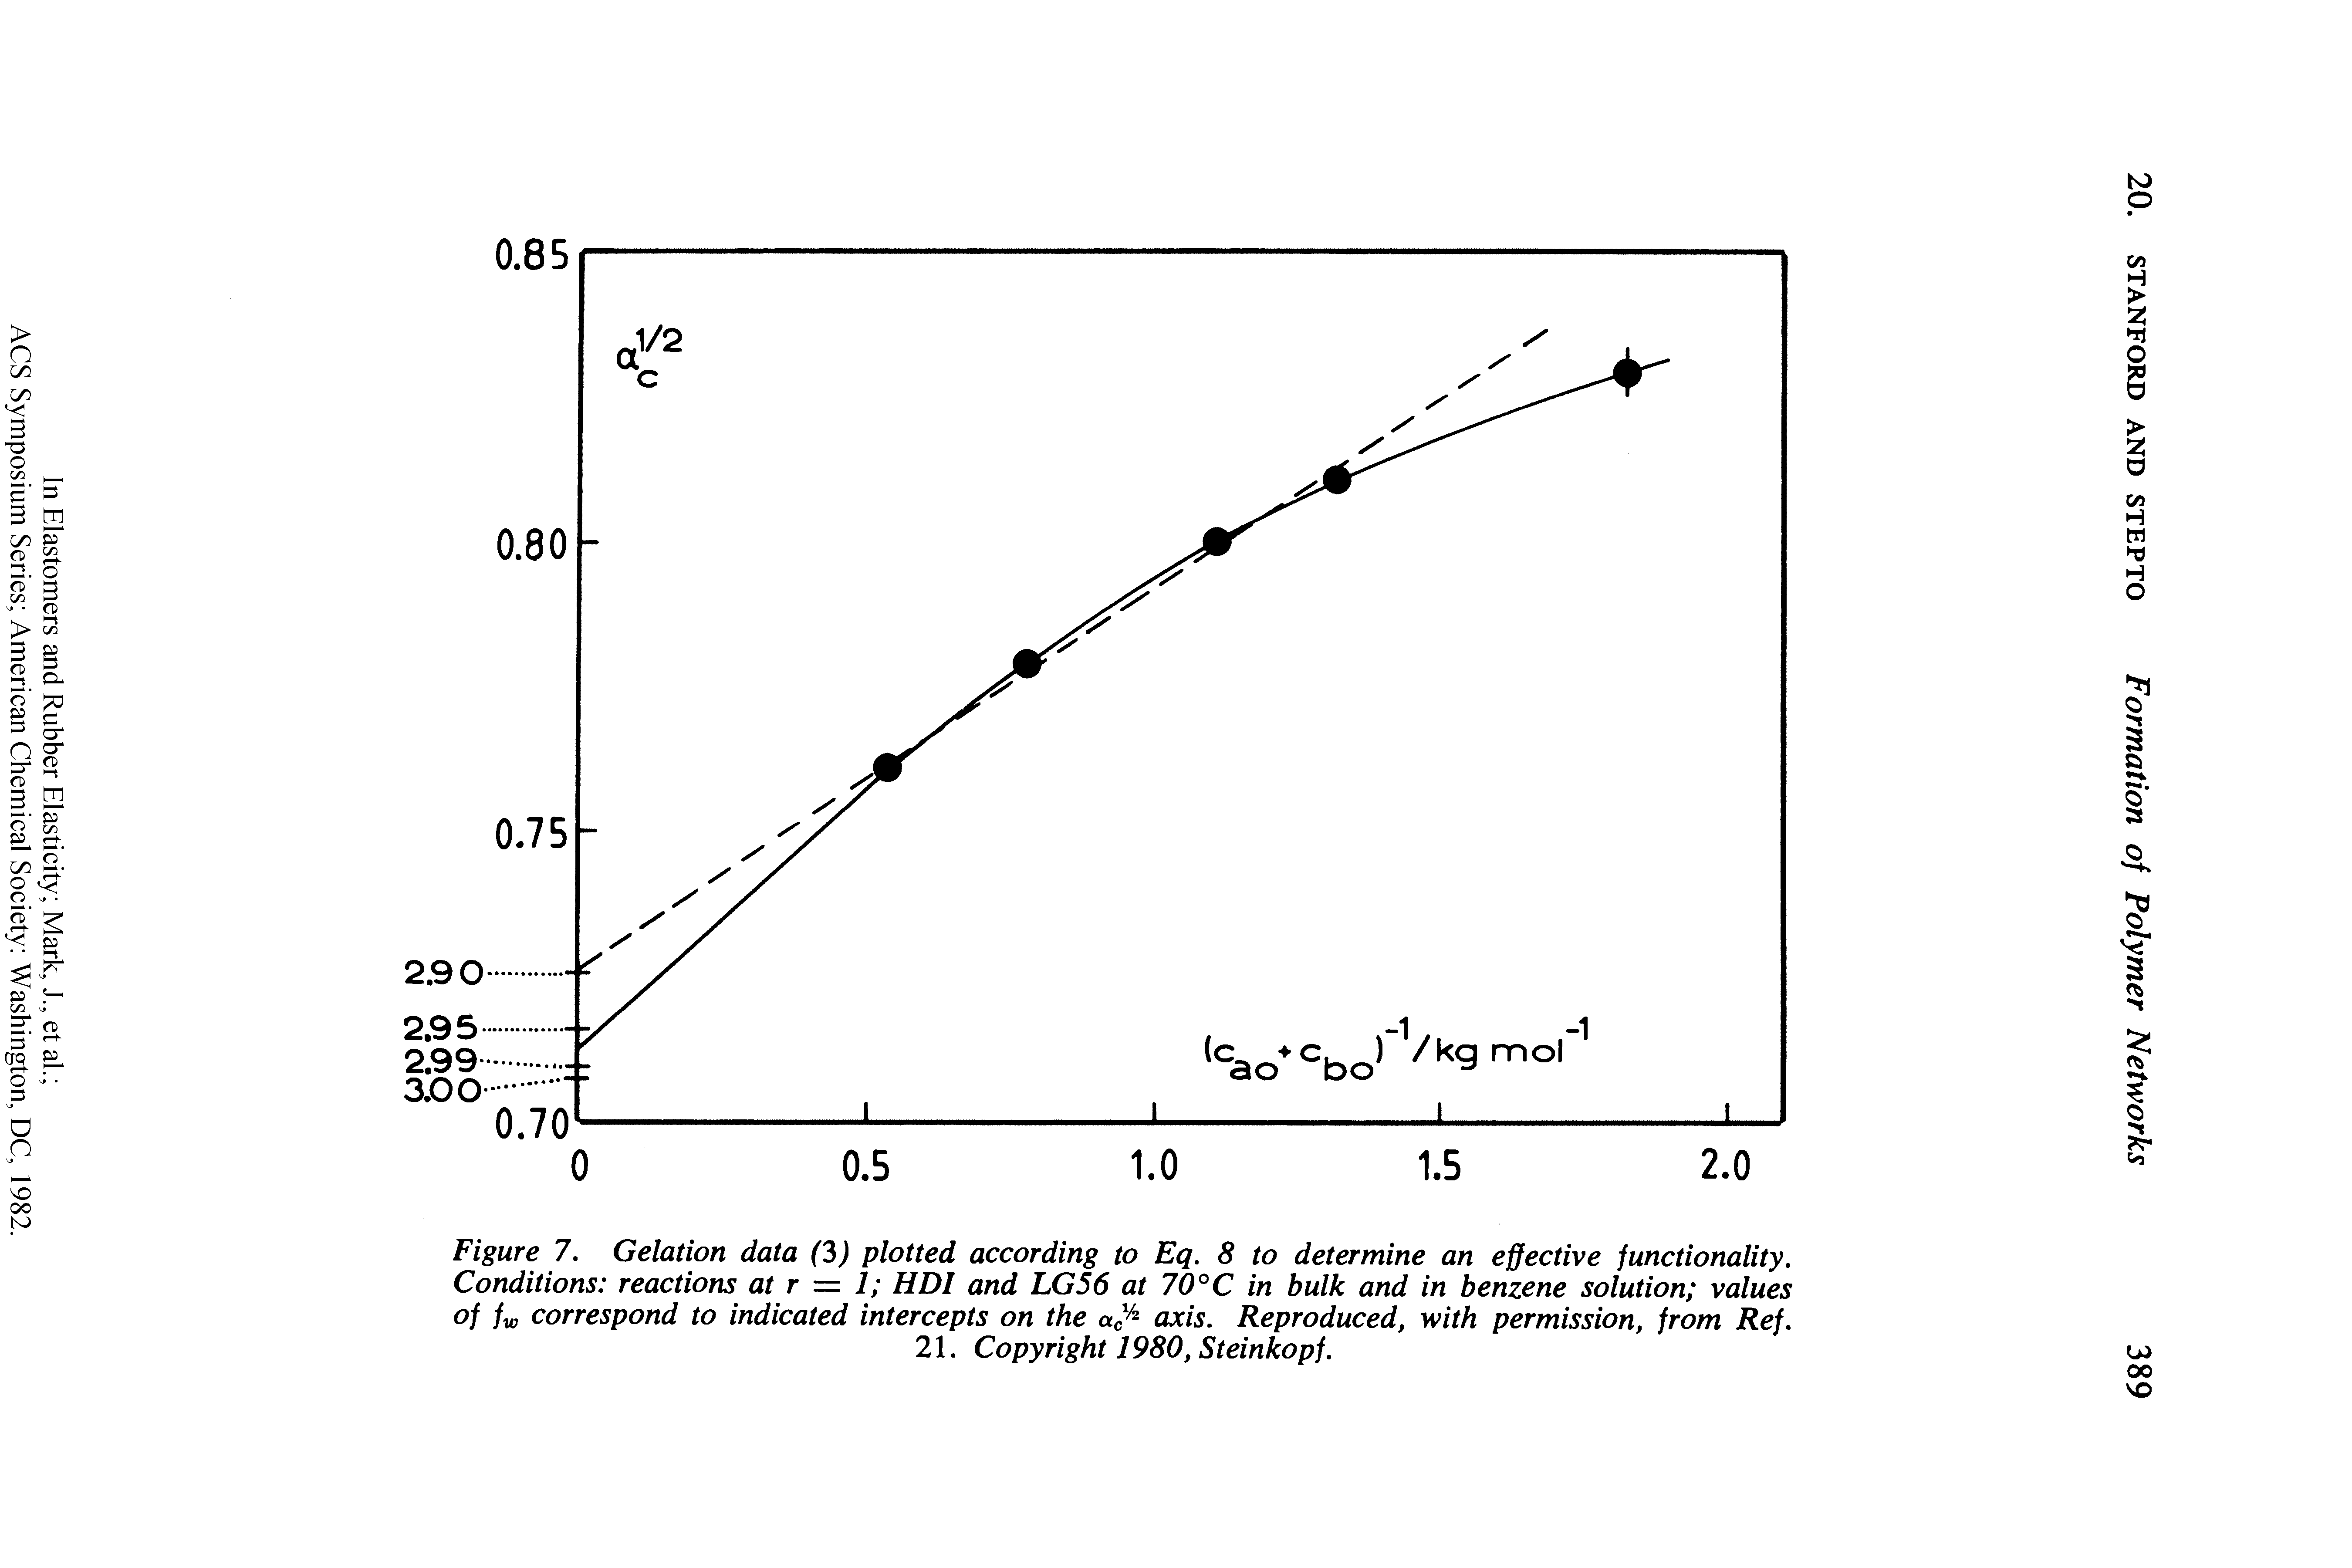 Figure 7. Gelation data (3) plotted according to Eq. 8 to determine an effective functionality.